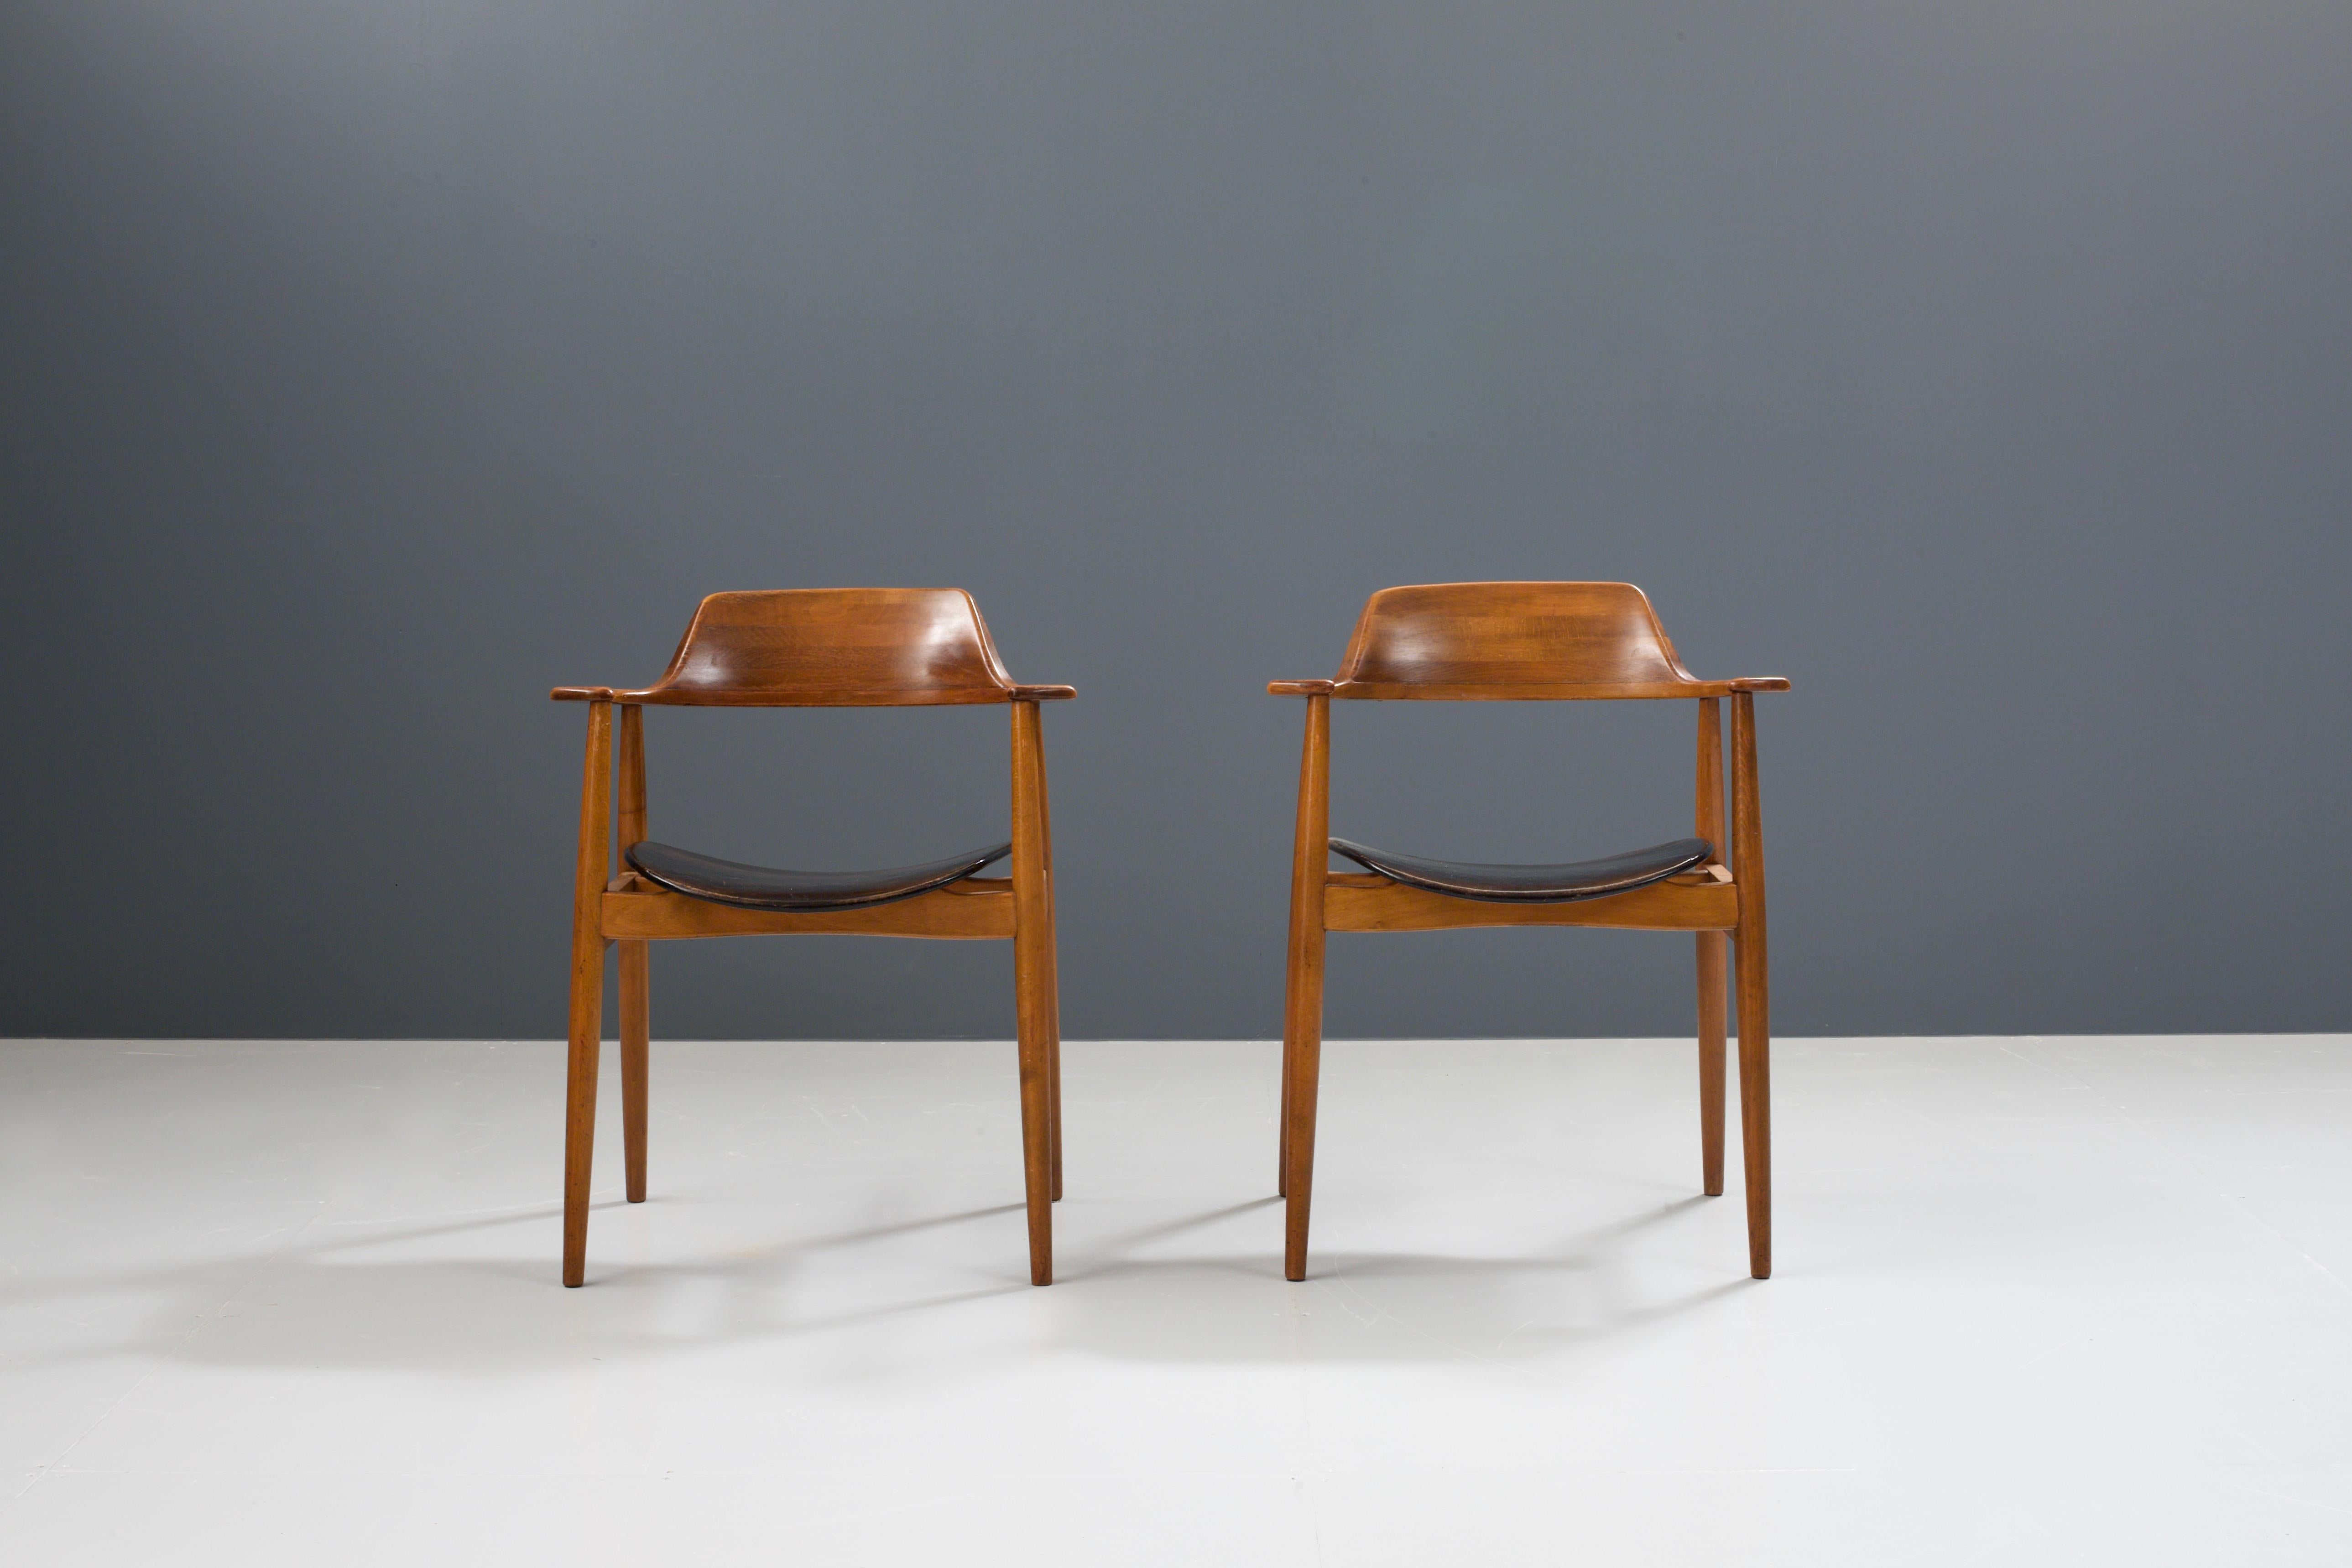 Rare set of two ‘411’ armchairs by Hartmut Lohmeyer for Wilkahn in beech and patinated leather, Germany, 1950's.

The sculptural and blunt armrests are actually what make this chair so interesting. Their shape is quite distinct and curvy and is in